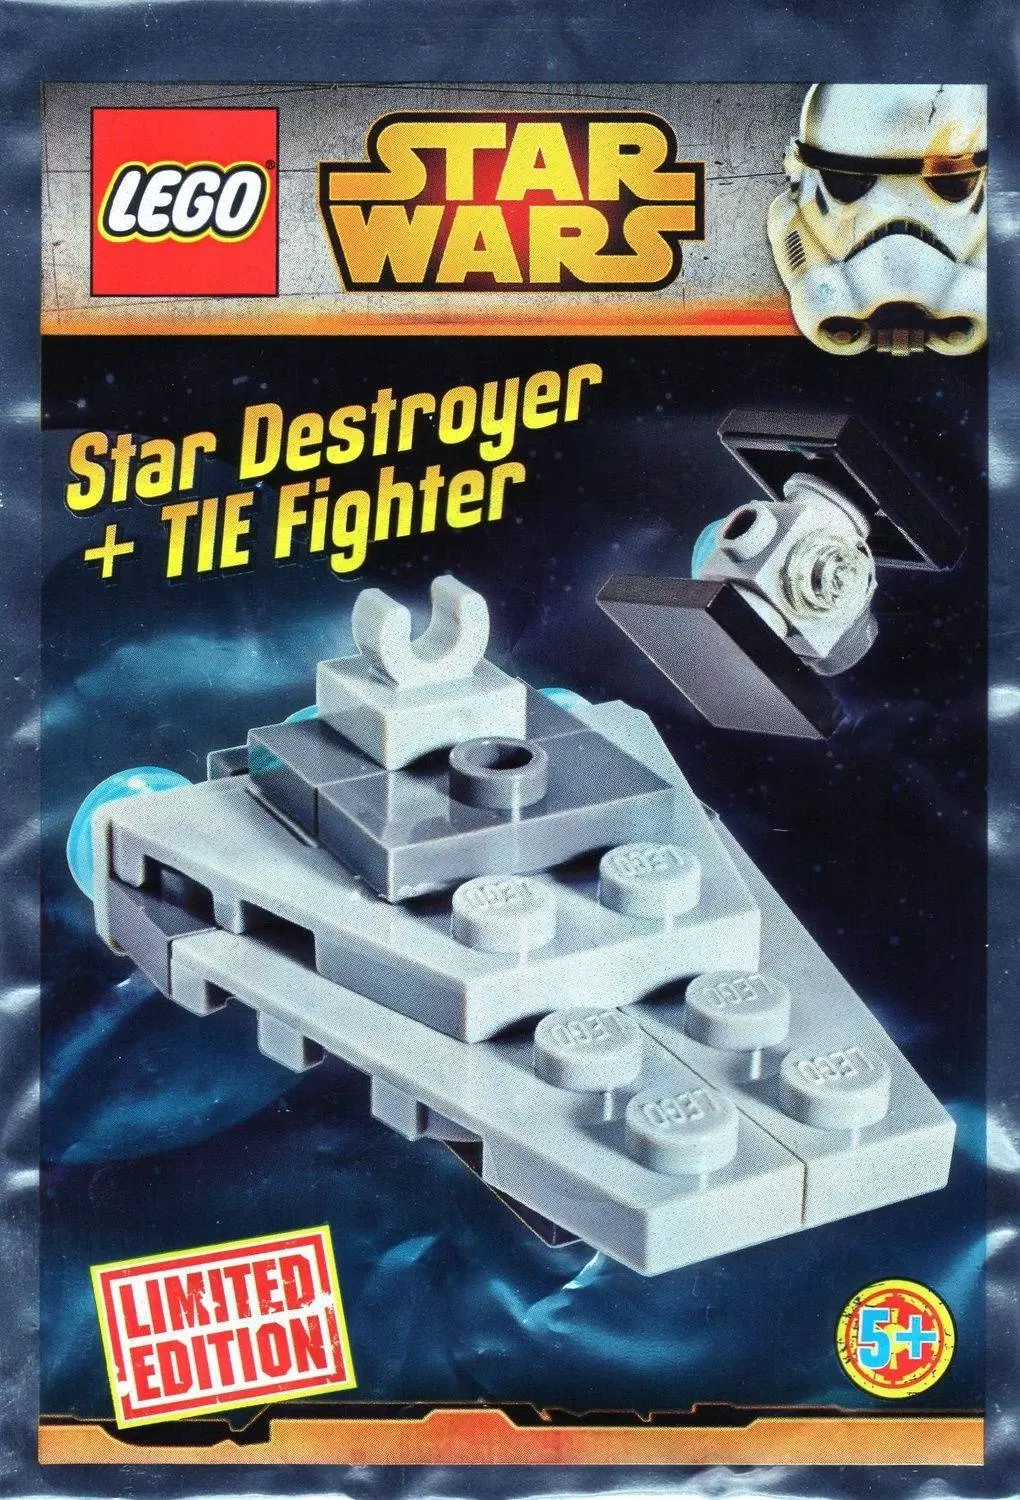 LEGO Star Wars - Micro Star Destroyer and TIE Fighter